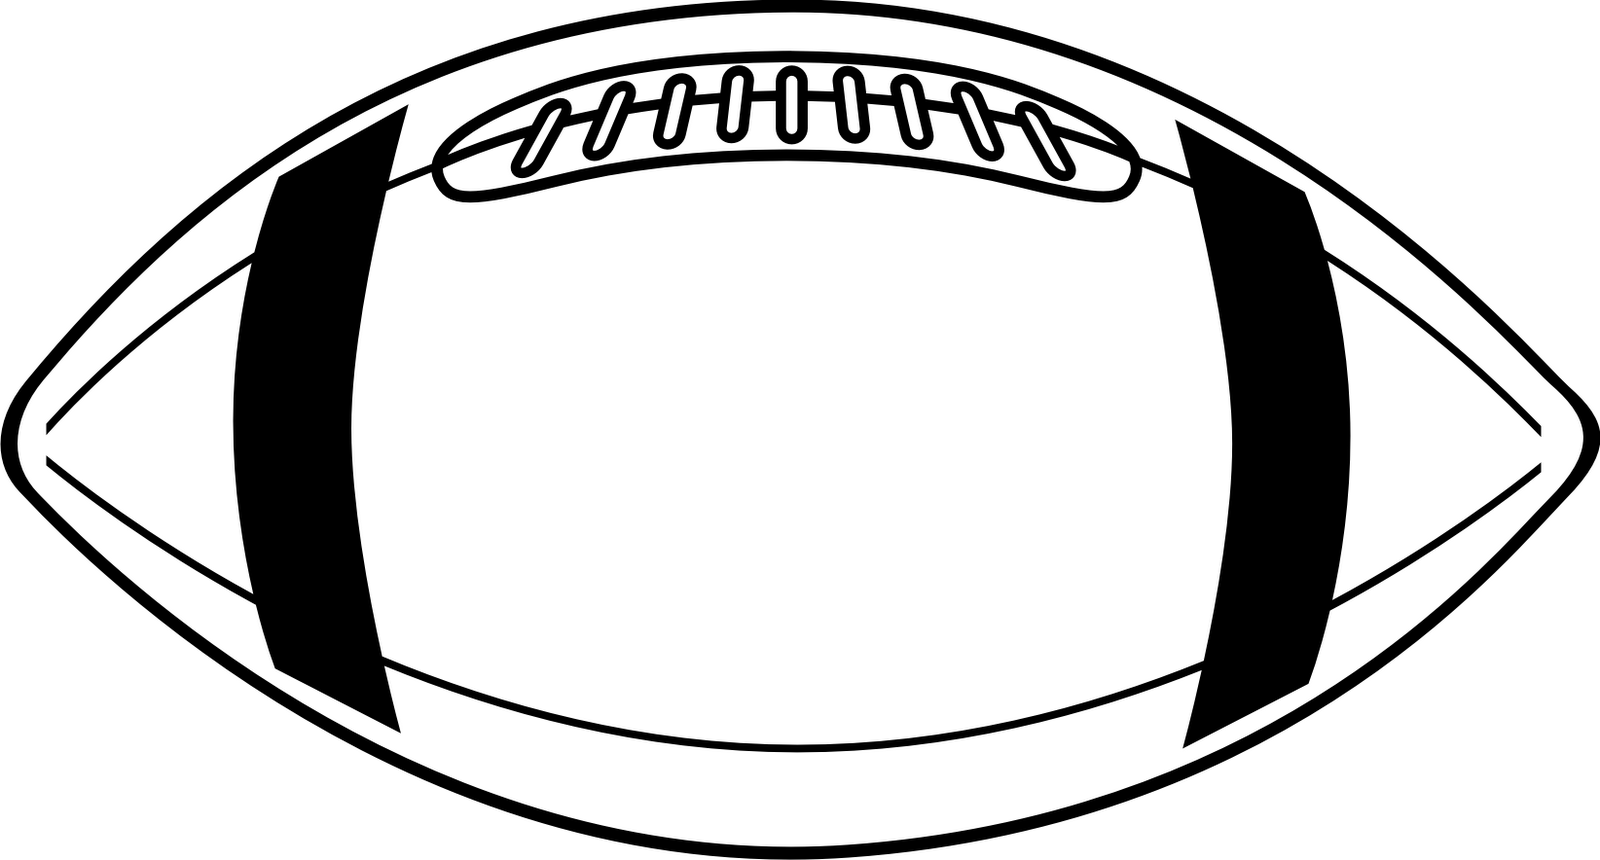 Nfl Football Player Drawings | Clipart Panda - Free Clipart Images